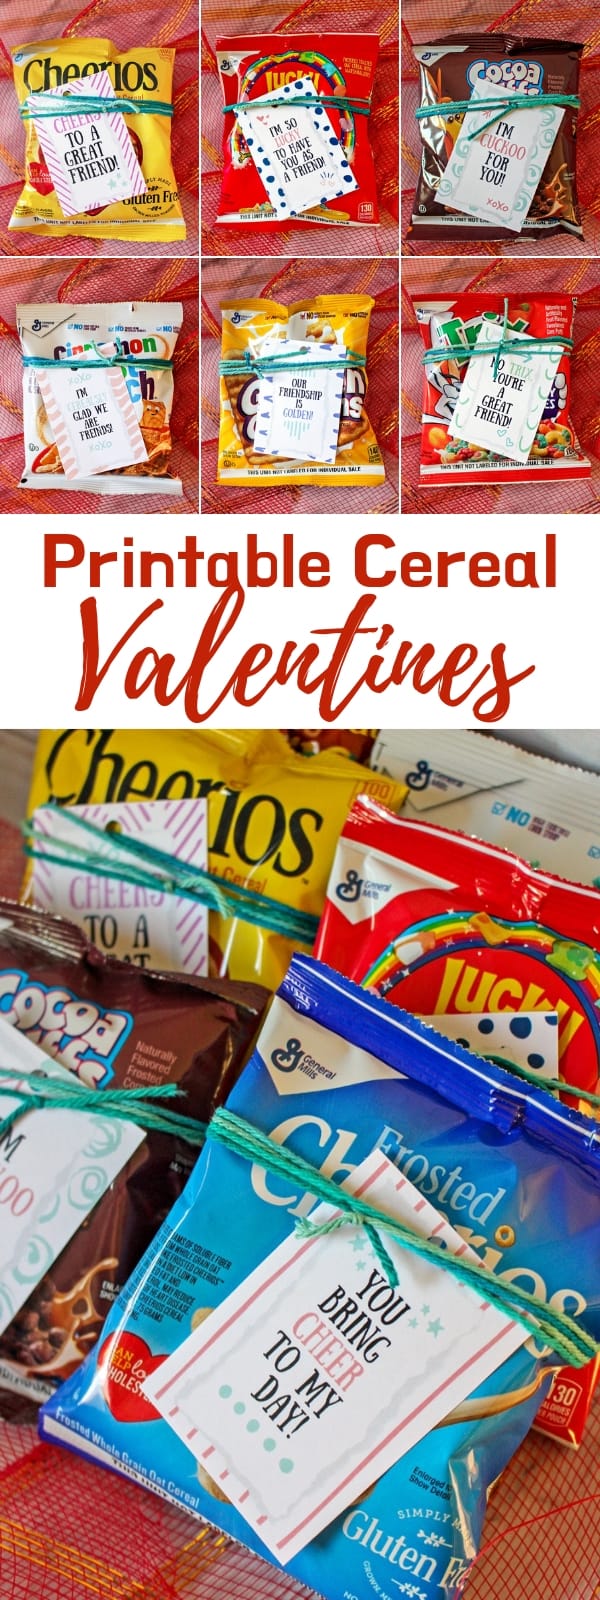 Use the provided free printable cereal valentine tags to make fun valentines to hand out to the kids in the classroom. Available with 8 different sayings!